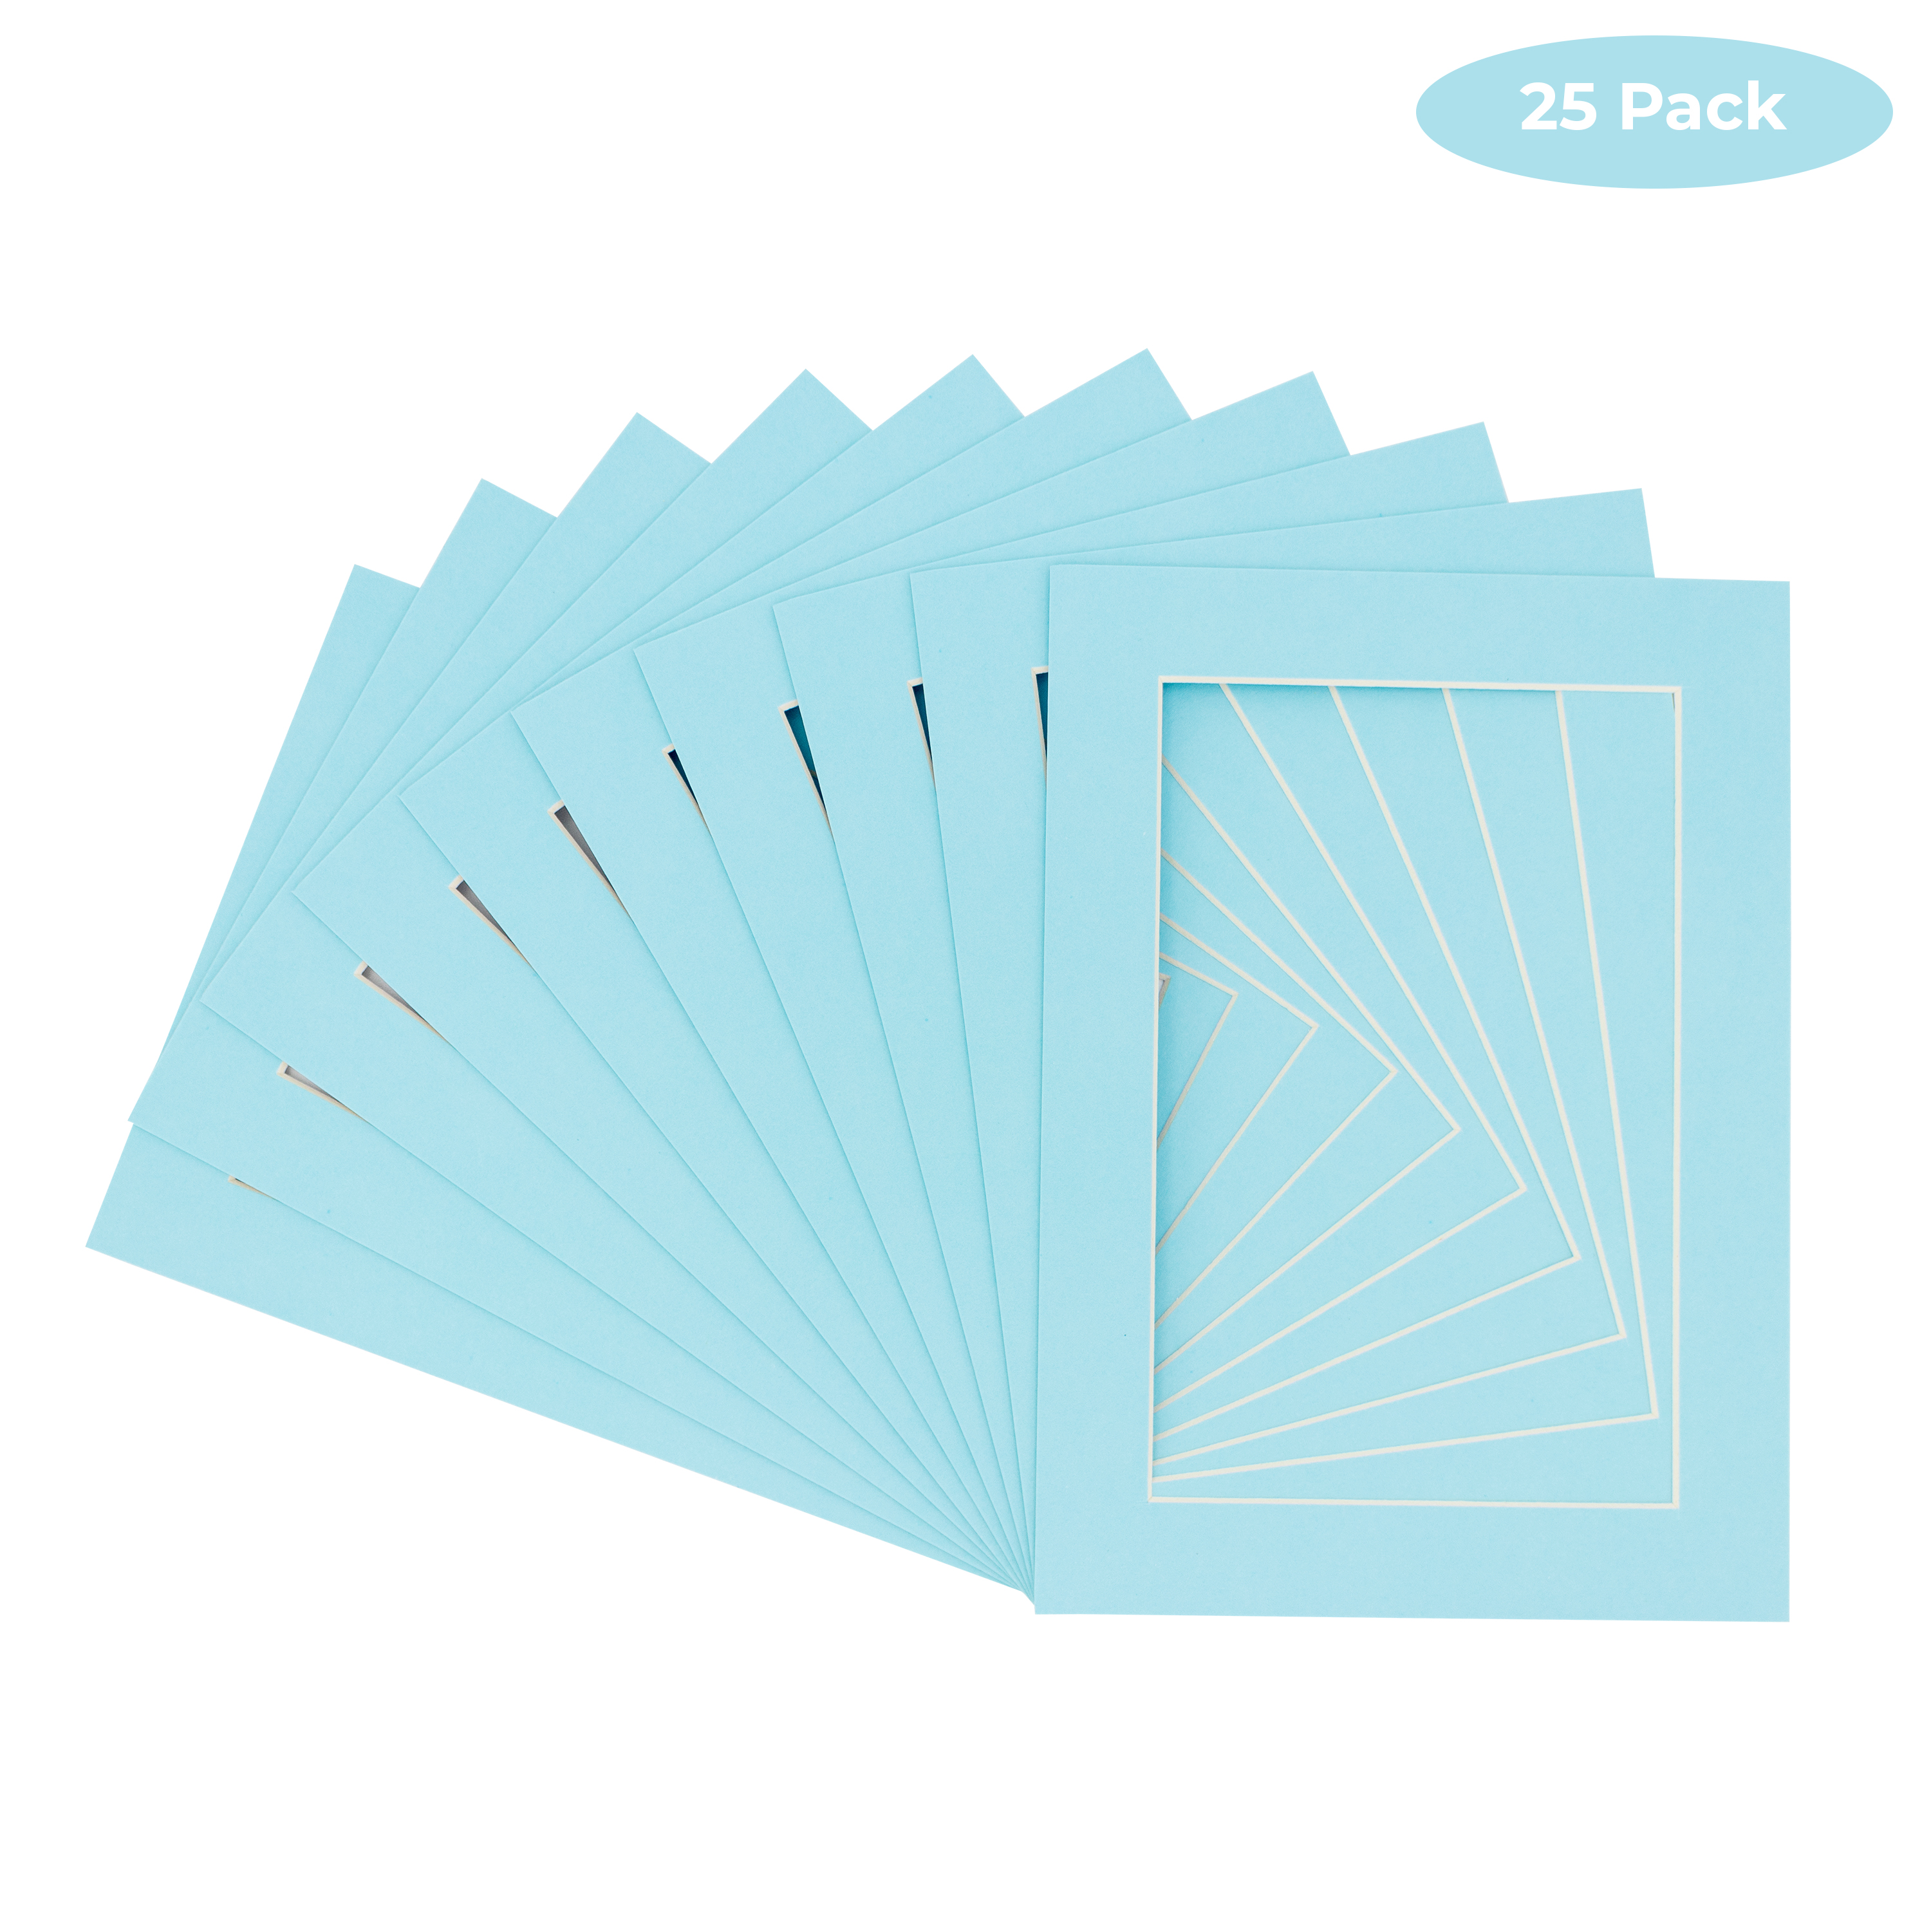 CustomPictureFrames.com Aqua Blue Acid Free 8.5x11 Picture Frame Mats with White Core Bevel Cut for 5x7 Pictures - Fits 8.5x11 Frame - Pack of 25 Mats